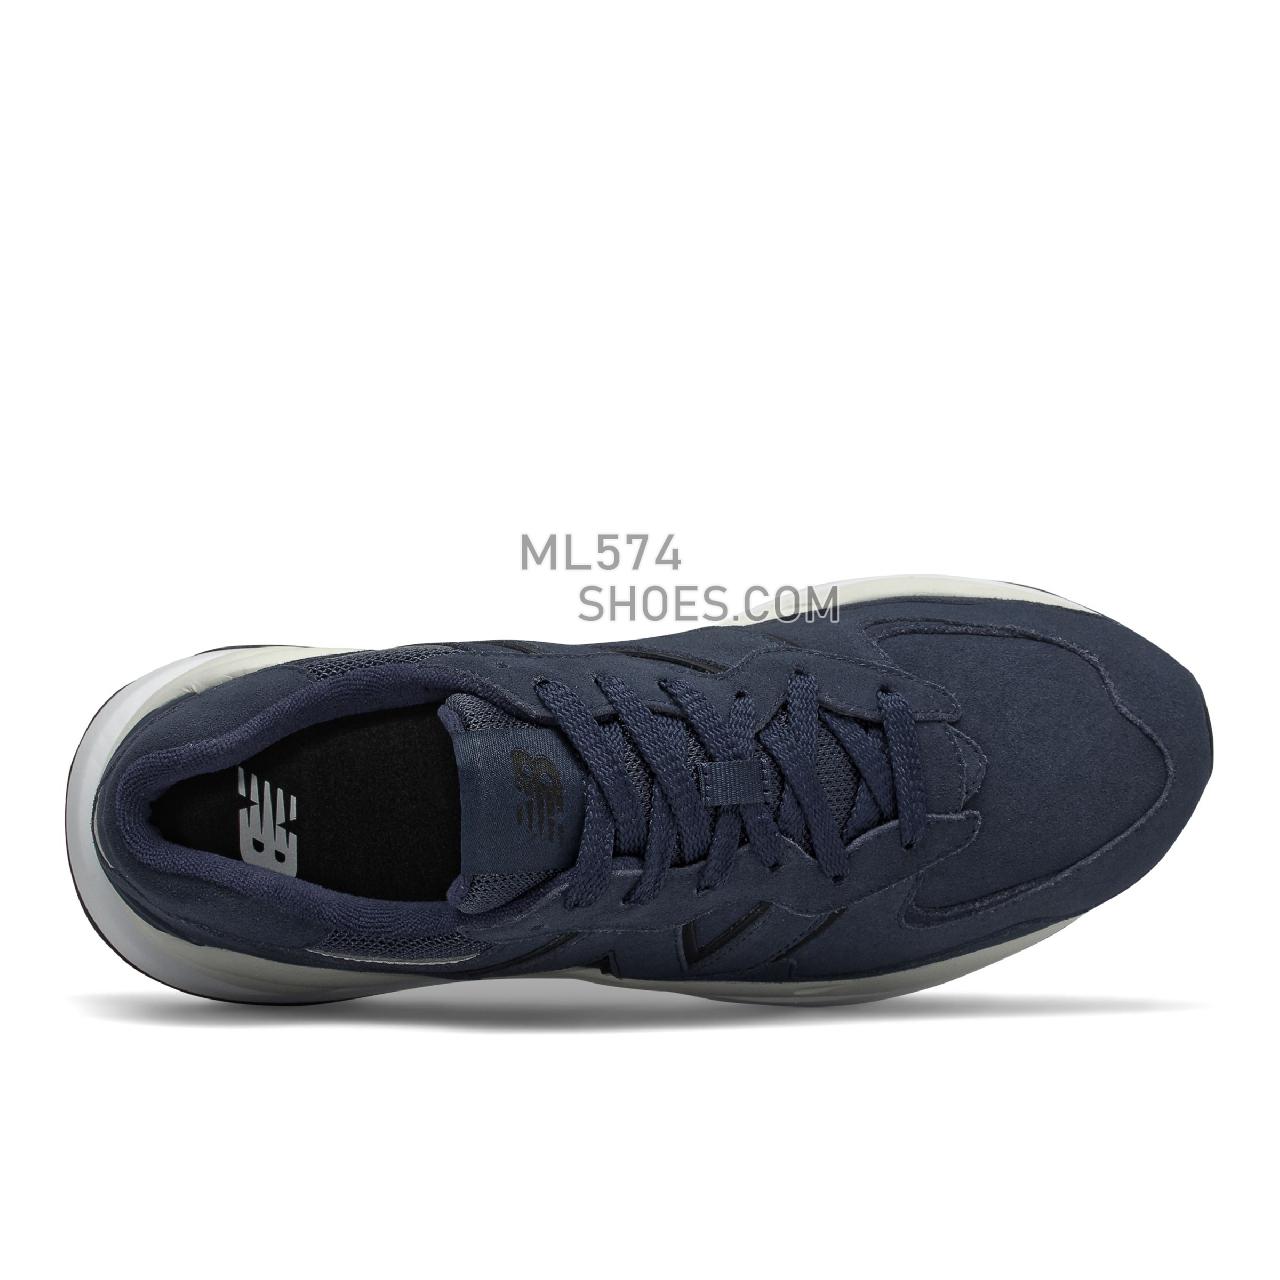 New Balance 57/40 - Men's Sport Style Sneakers - Team Navy with Black - M5740RA1